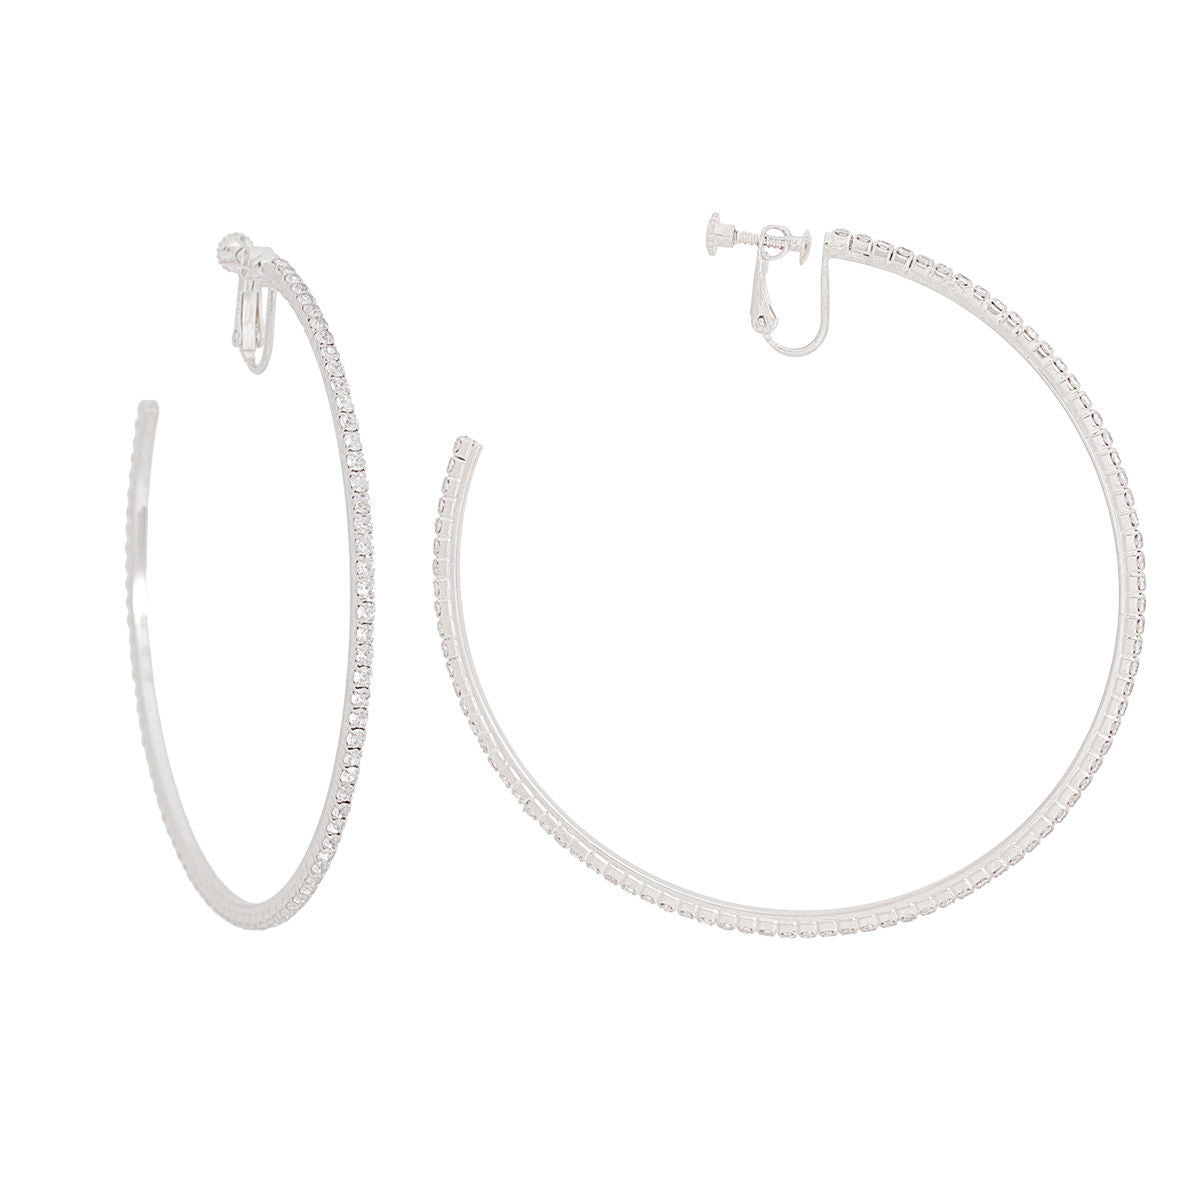 Clip On Medium Silver Pave C Hoops for Women